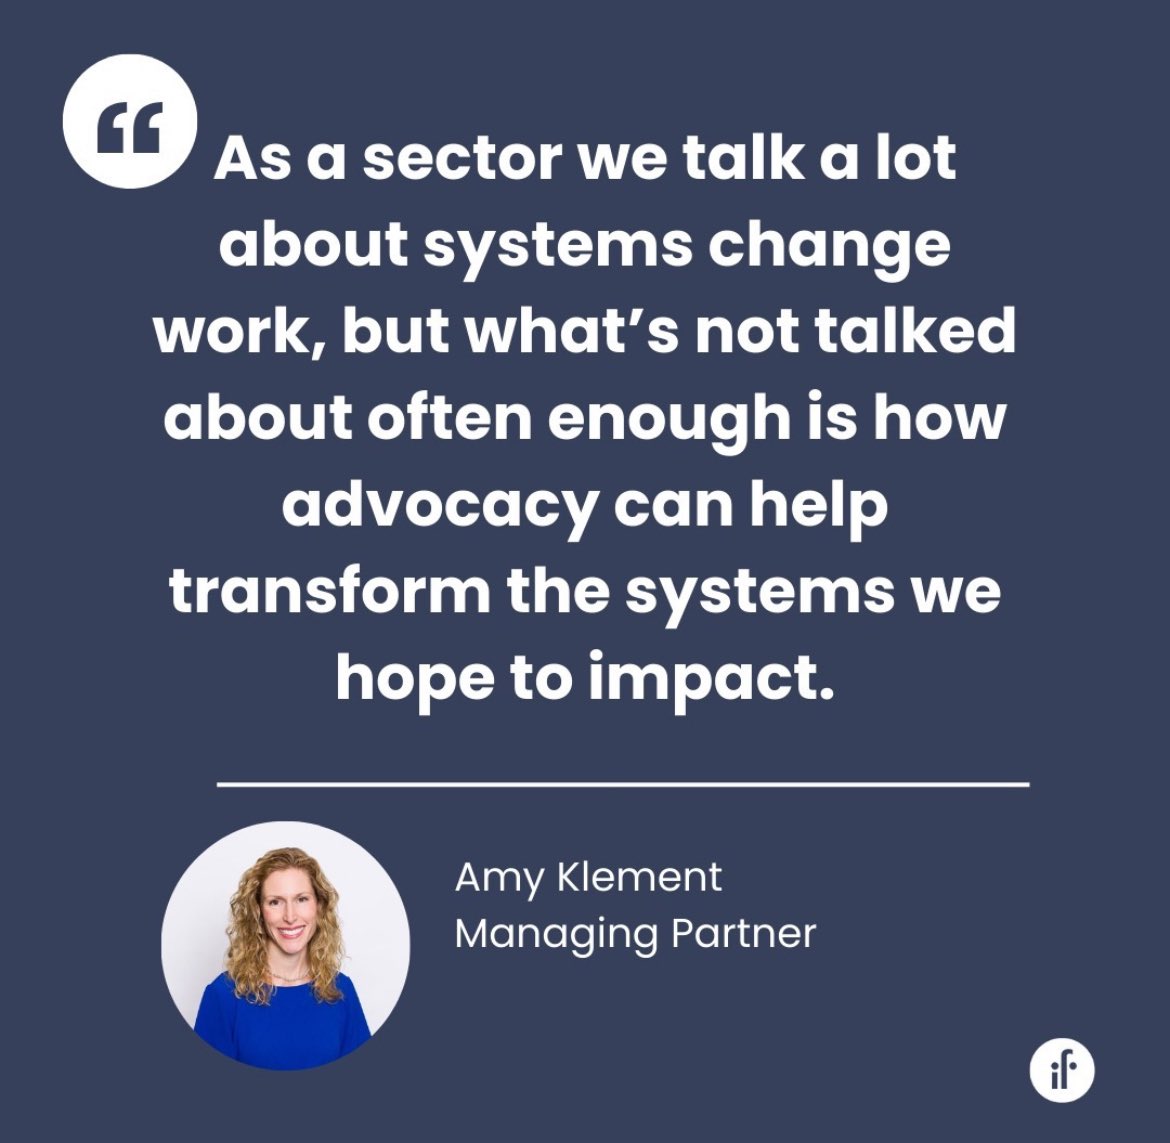 I know deep down that #AdvocacyMatters for changing educational experiences for students and improving outcomes. I appreciate this reminder and framing from @amyklement of @ImaginableFut here: imaginablefutures.com/learnings/advo…

We must advocate fiercely for #EdEquity & fairness. Onward!